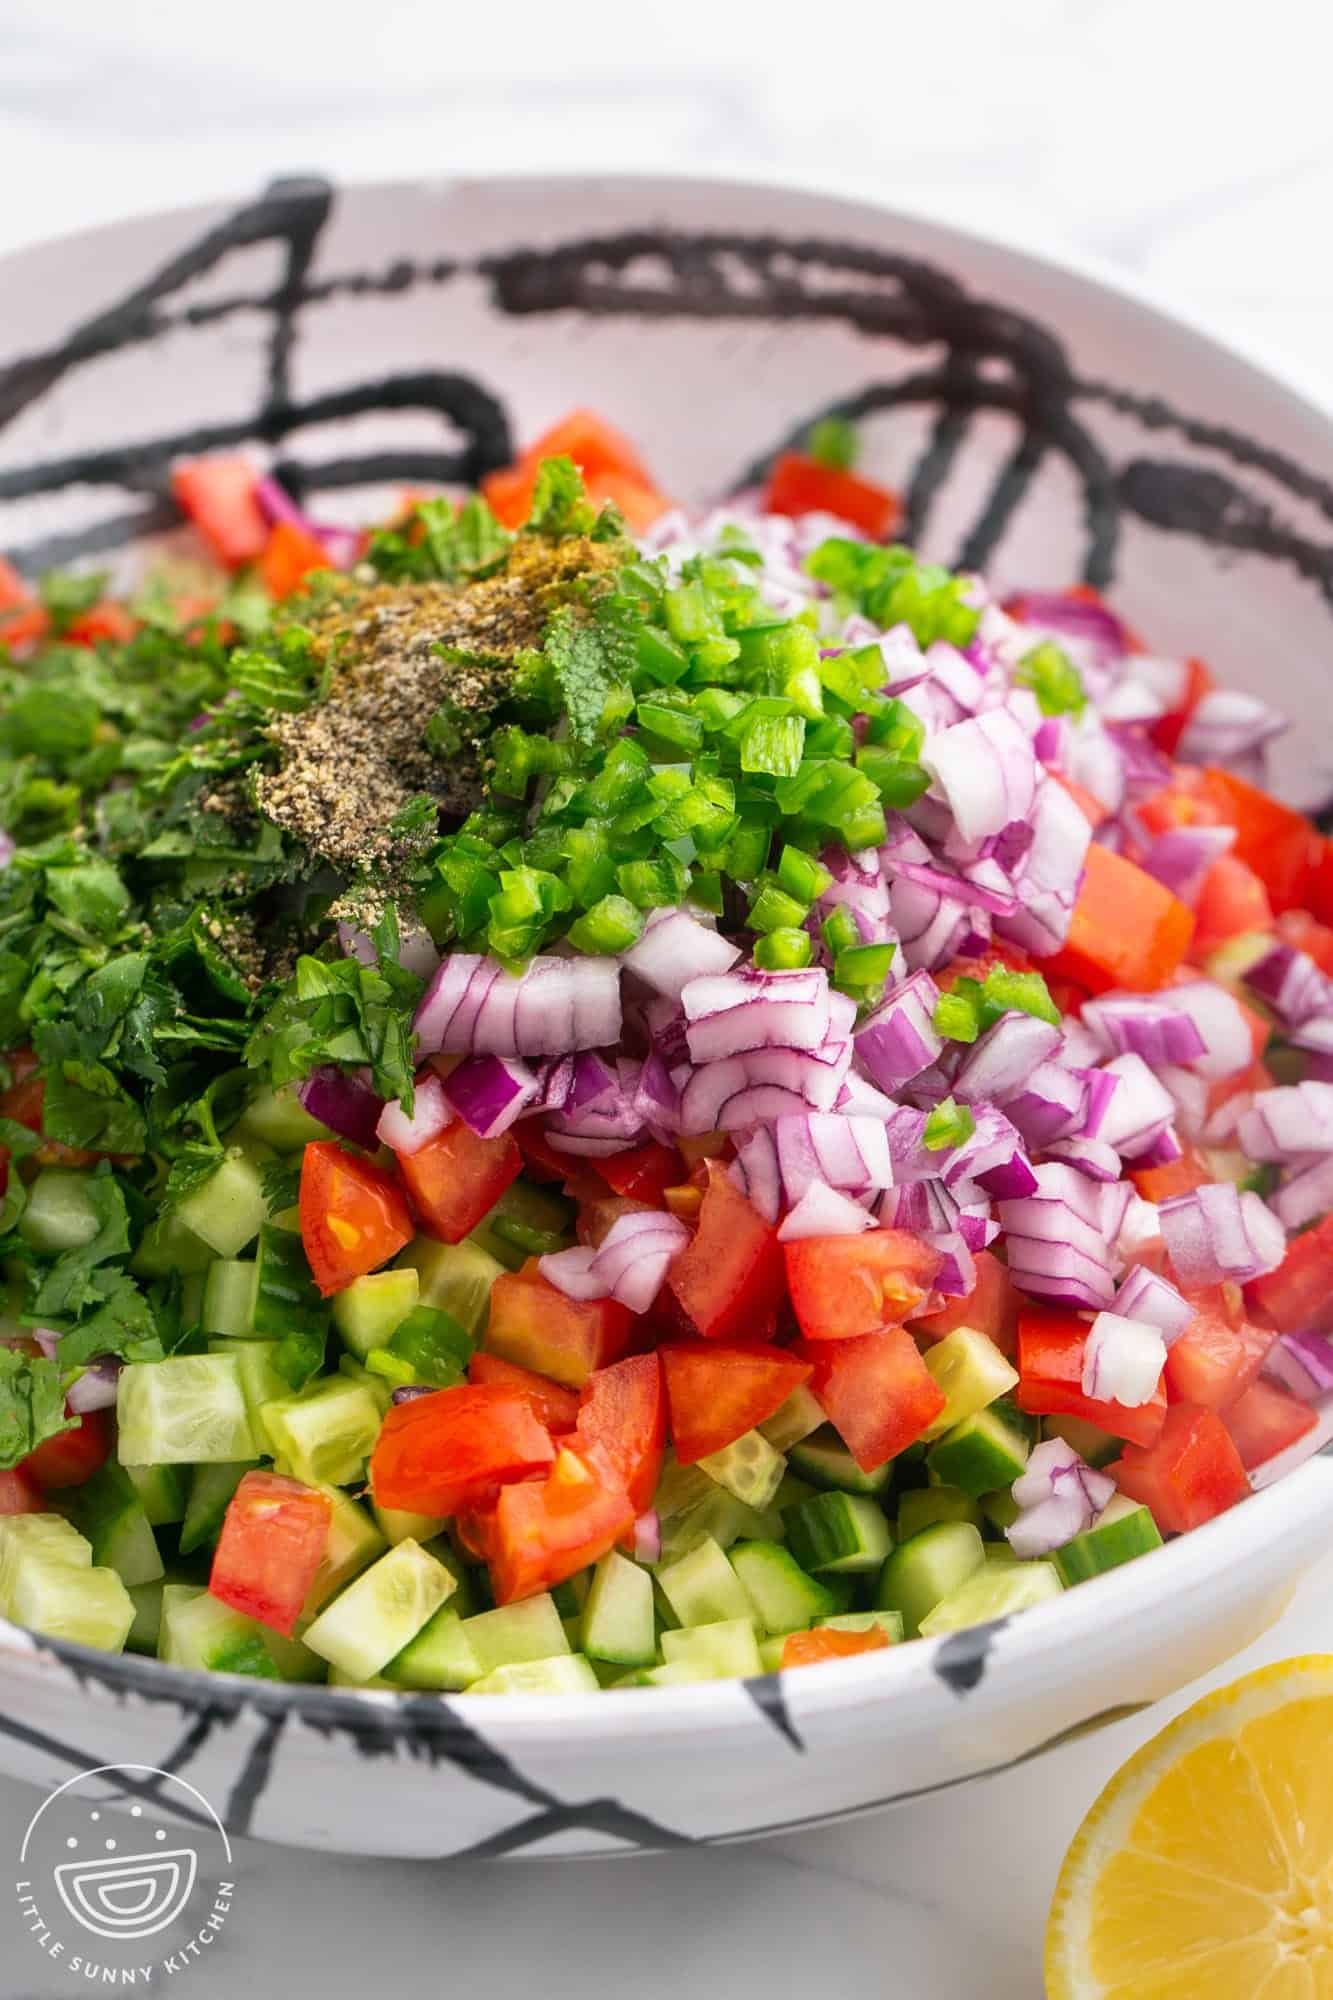 Vegetables and herbs diced small, in a large bowl before mixing the salad